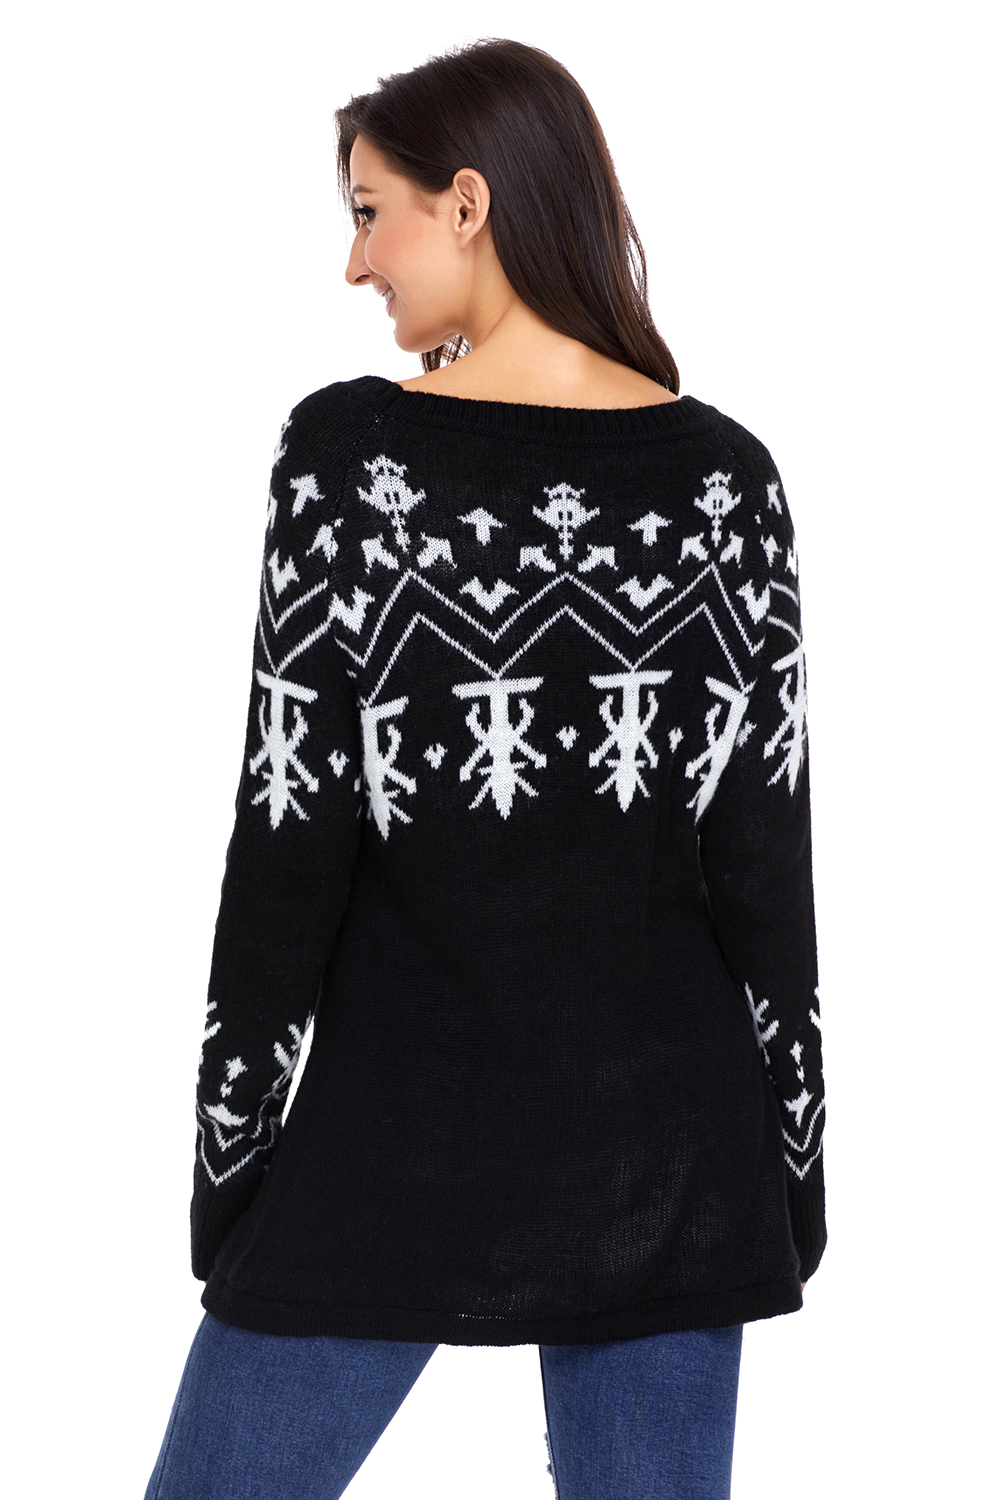 BY27720-2 Black A-line Casual Fit Christmas Fashion Sweater